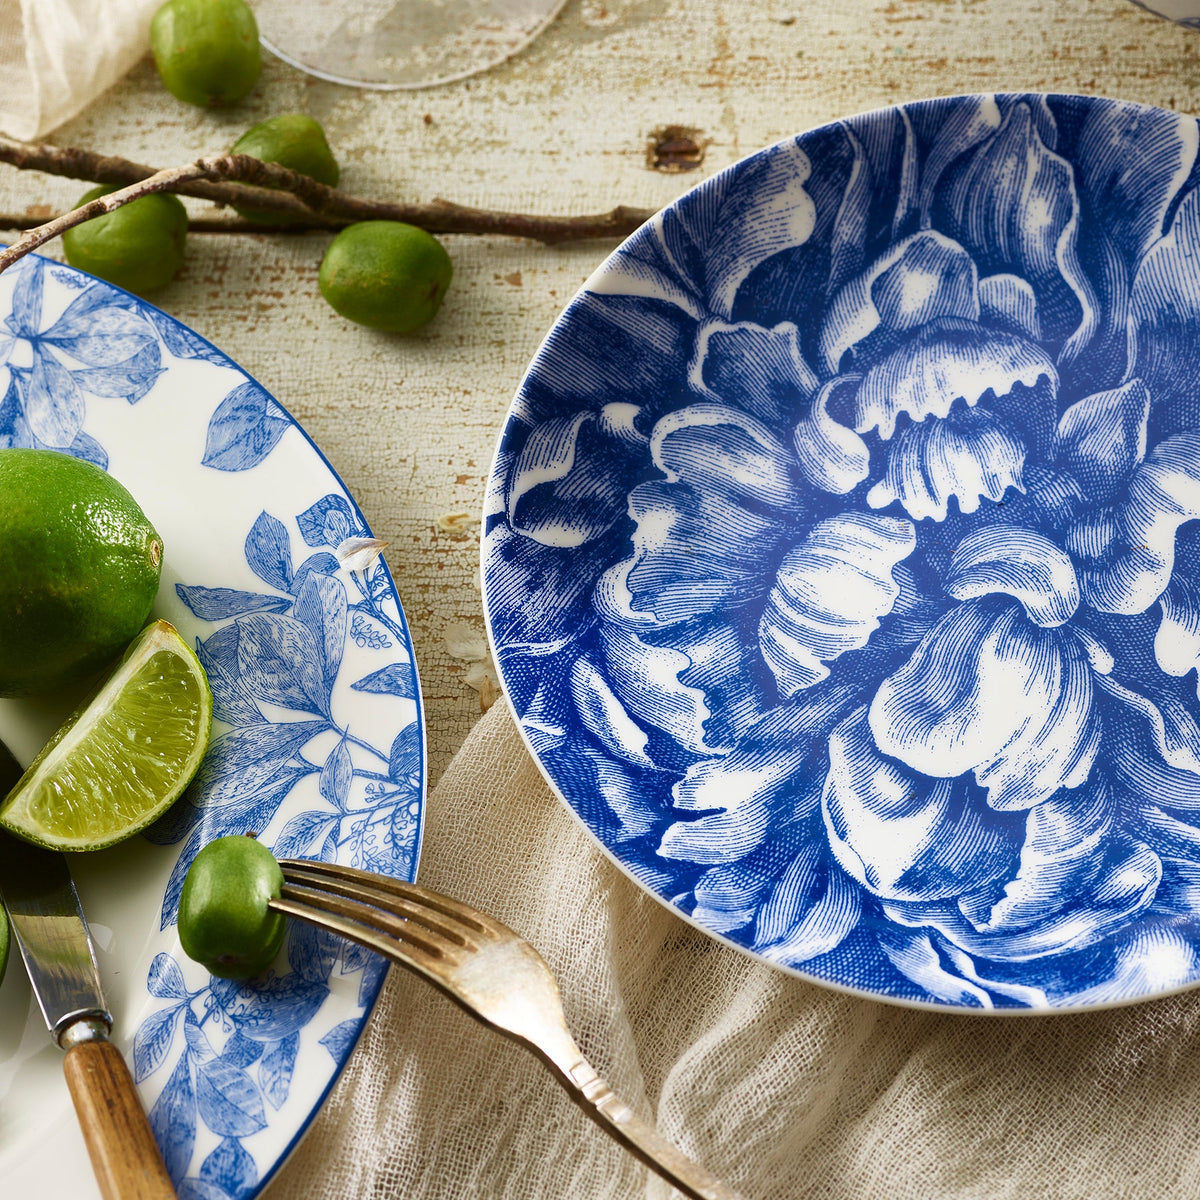 A Peony Blue 4-Piece Place Setting with a lime slice on it, featuring a Caskata Artisanal Home theme.